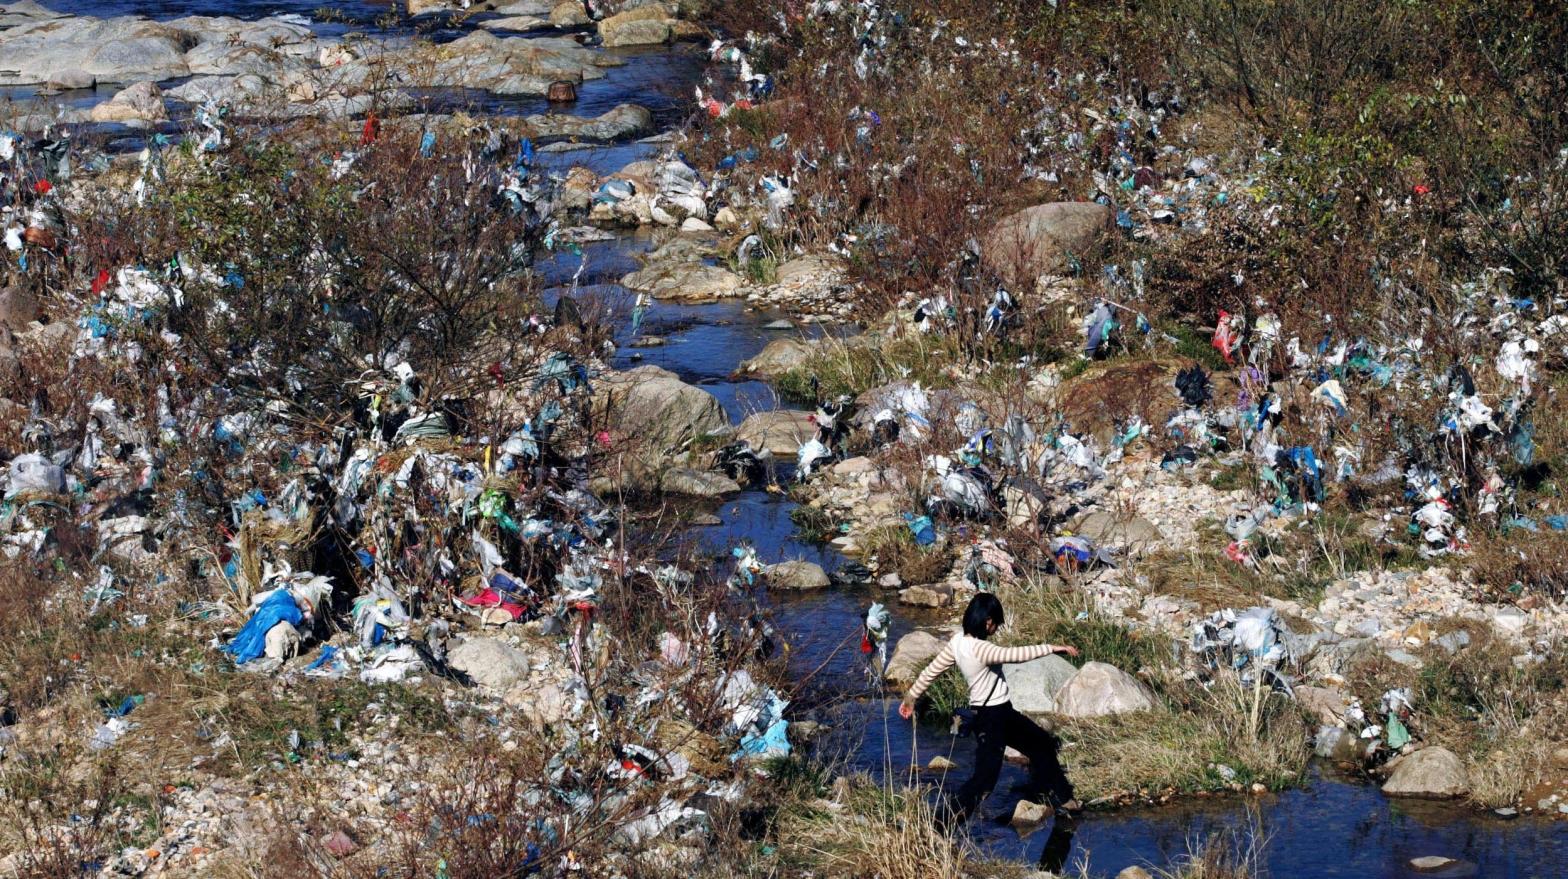 A woman crosses a stream running through land littered with plastic wastes in Shangxi village, eastern China's Zhejiang province. (Photo: CHINATOPIX, AP)